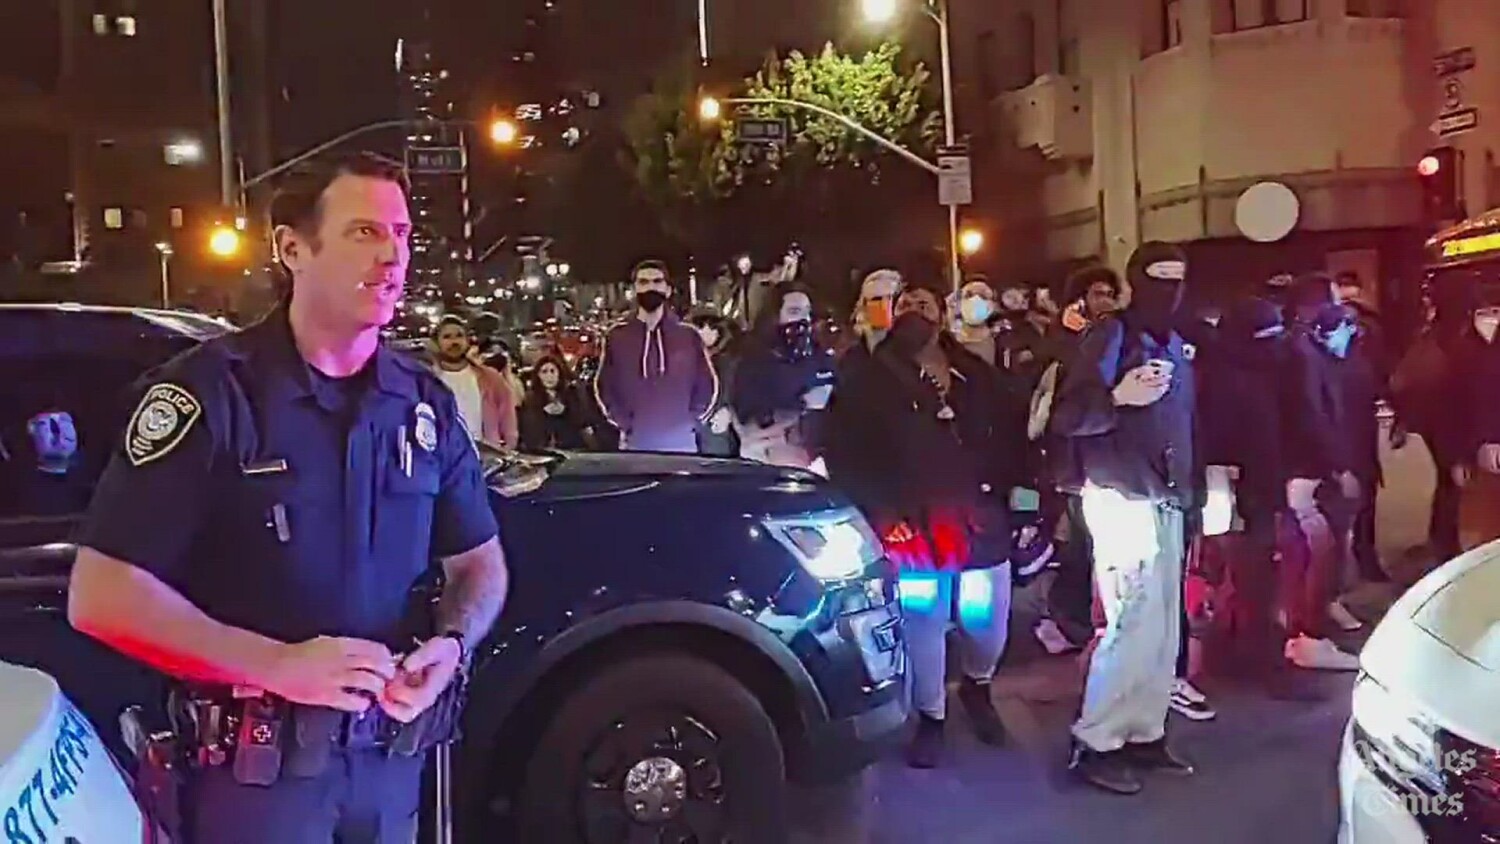 LAPD confronted federal officials after agents escalated tensions at L.A. protest